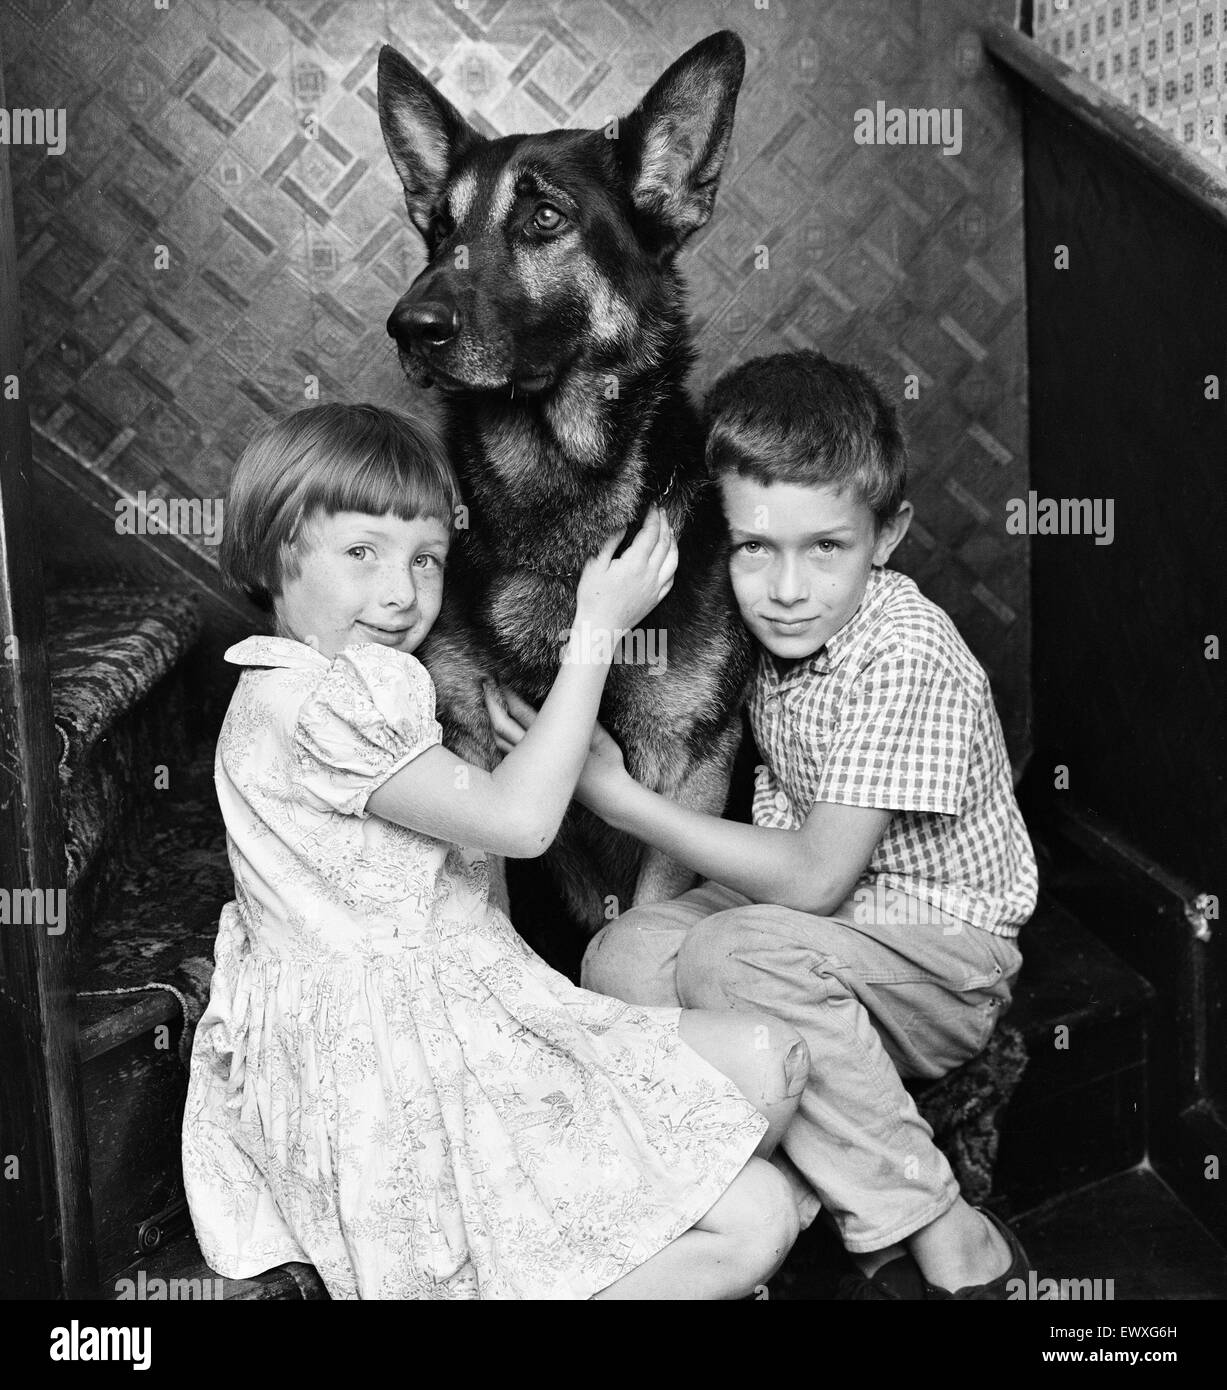 Fee £75 per image up to 1/4 page - £95  for 1/2 page  Schuten, the brave Alsatian dog who spotted a fire and raised the alarm ... and saved the lives of a family. With him areLeslie Chandler 8 and sister Christine 7, two of the people he saved. He spotted Stock Photo